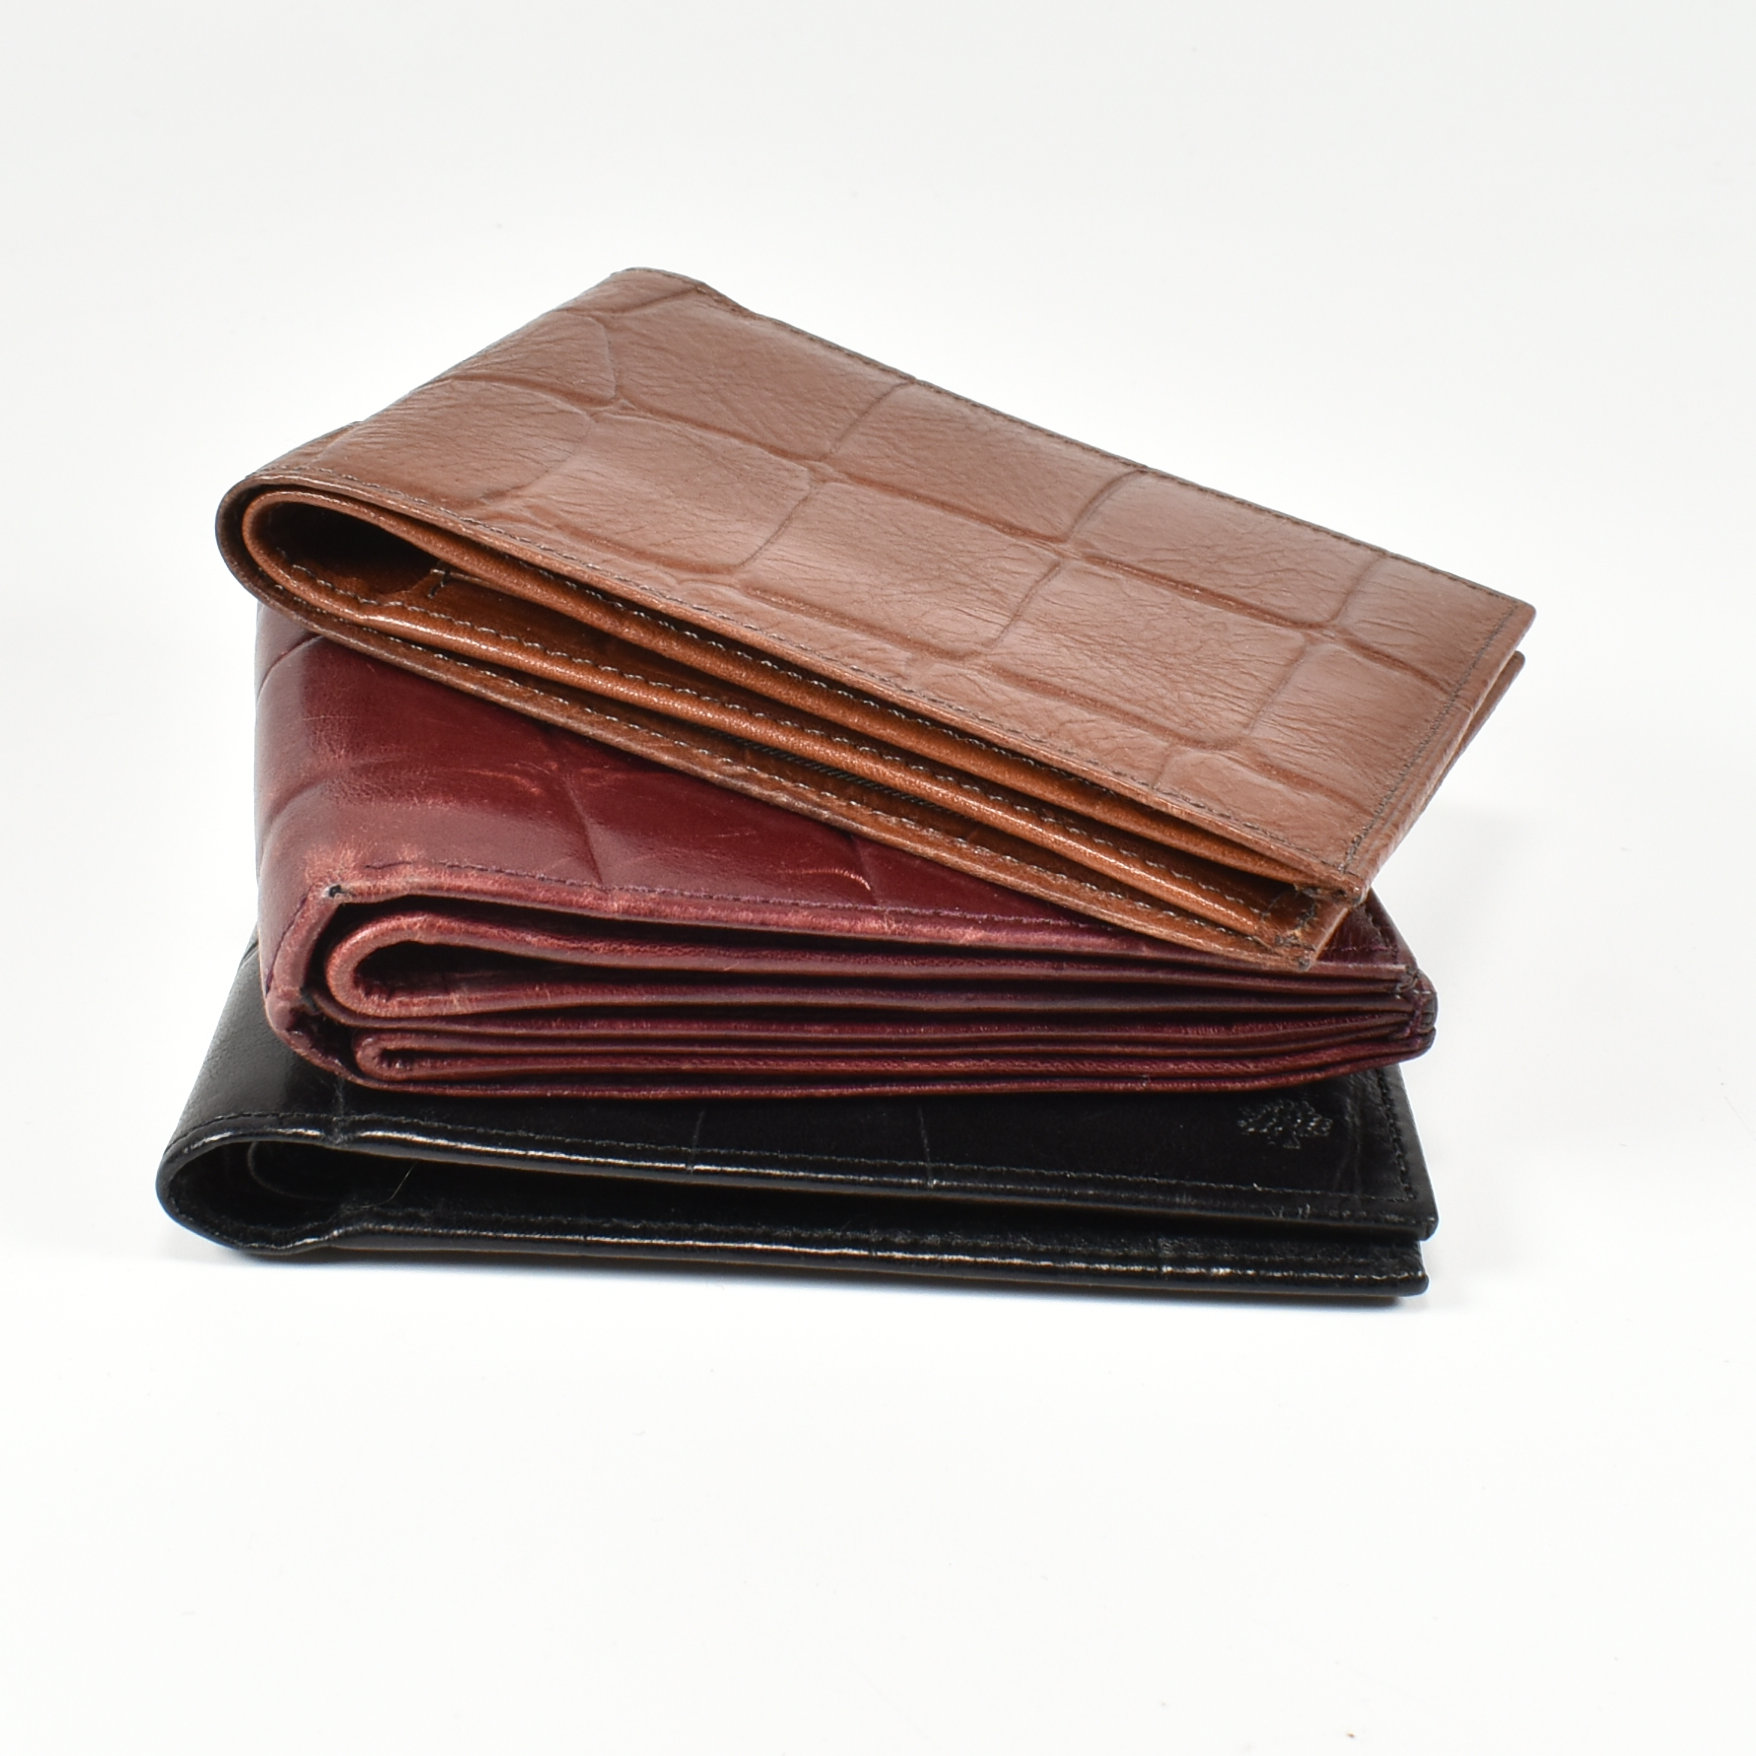 THREE MULBERRY CARD WALLETS - Image 11 of 12